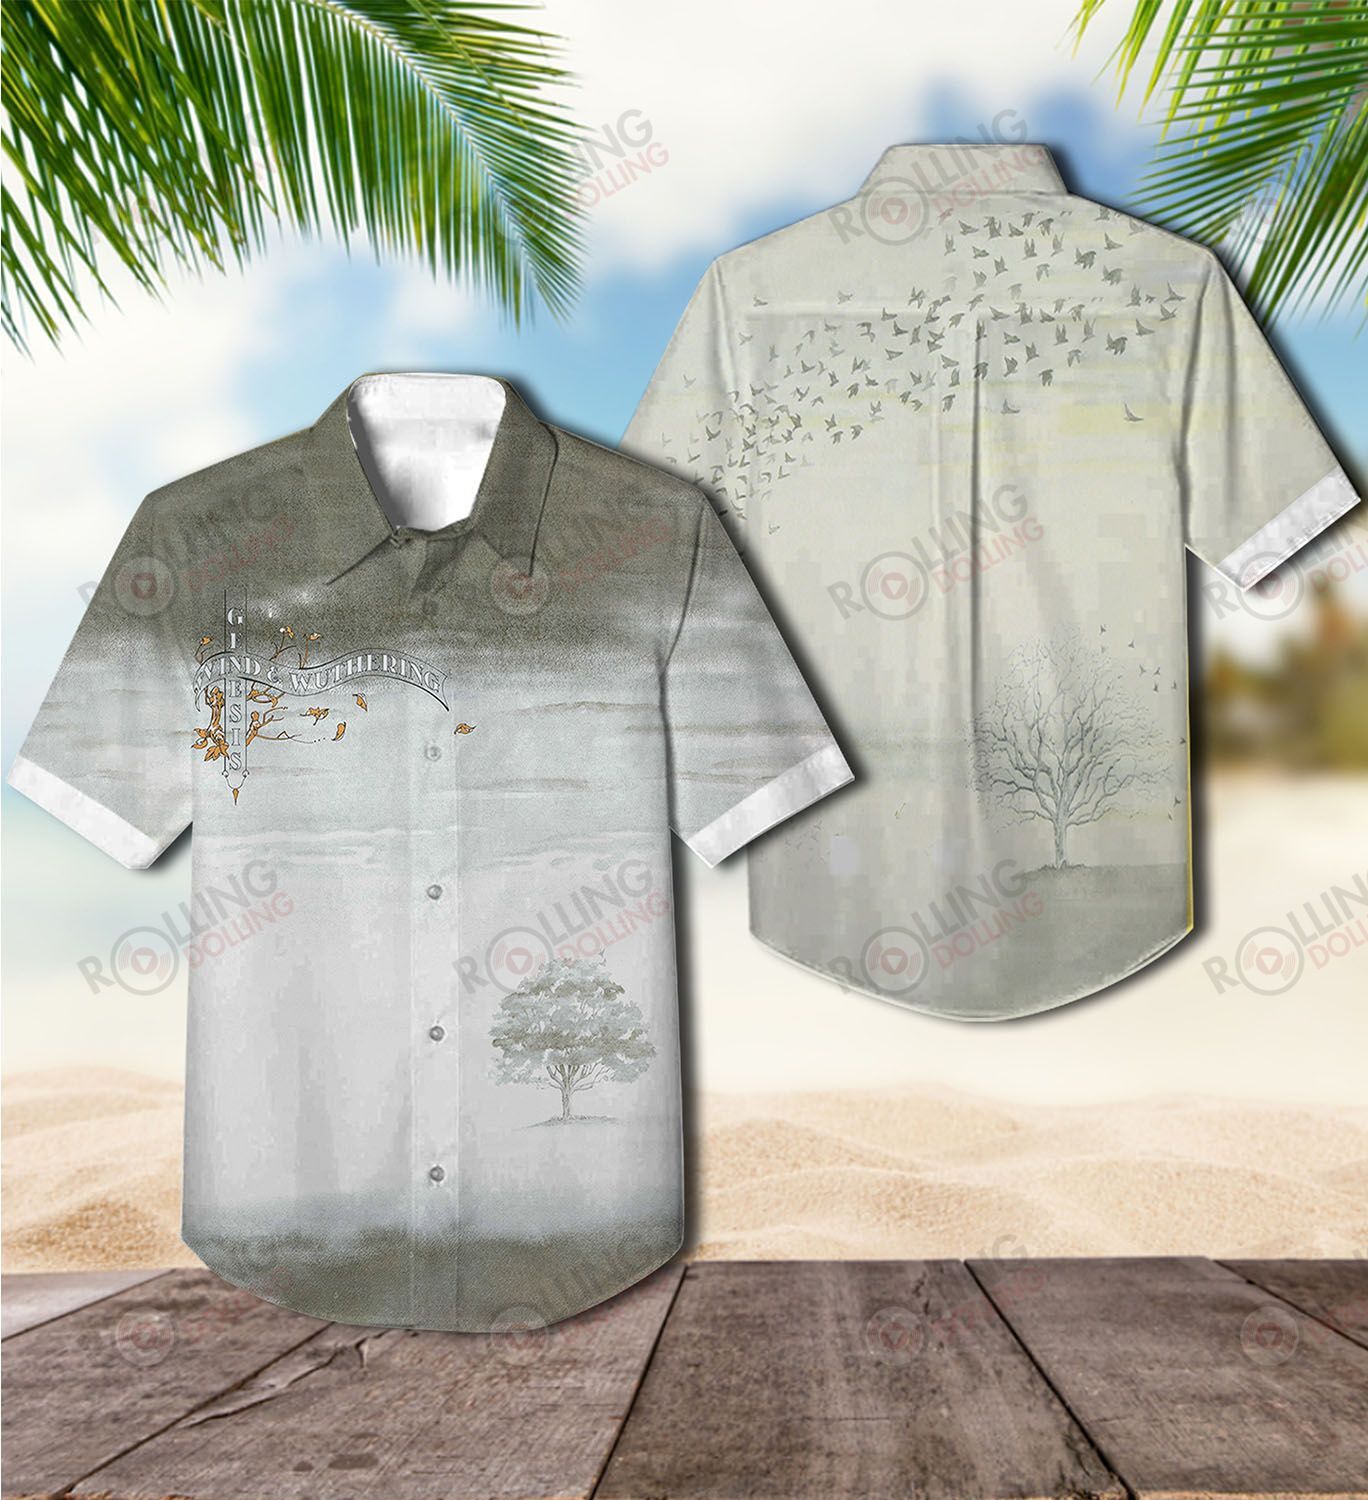 You'll have the perfect vacation outfit with this Hawaiian shirt 409